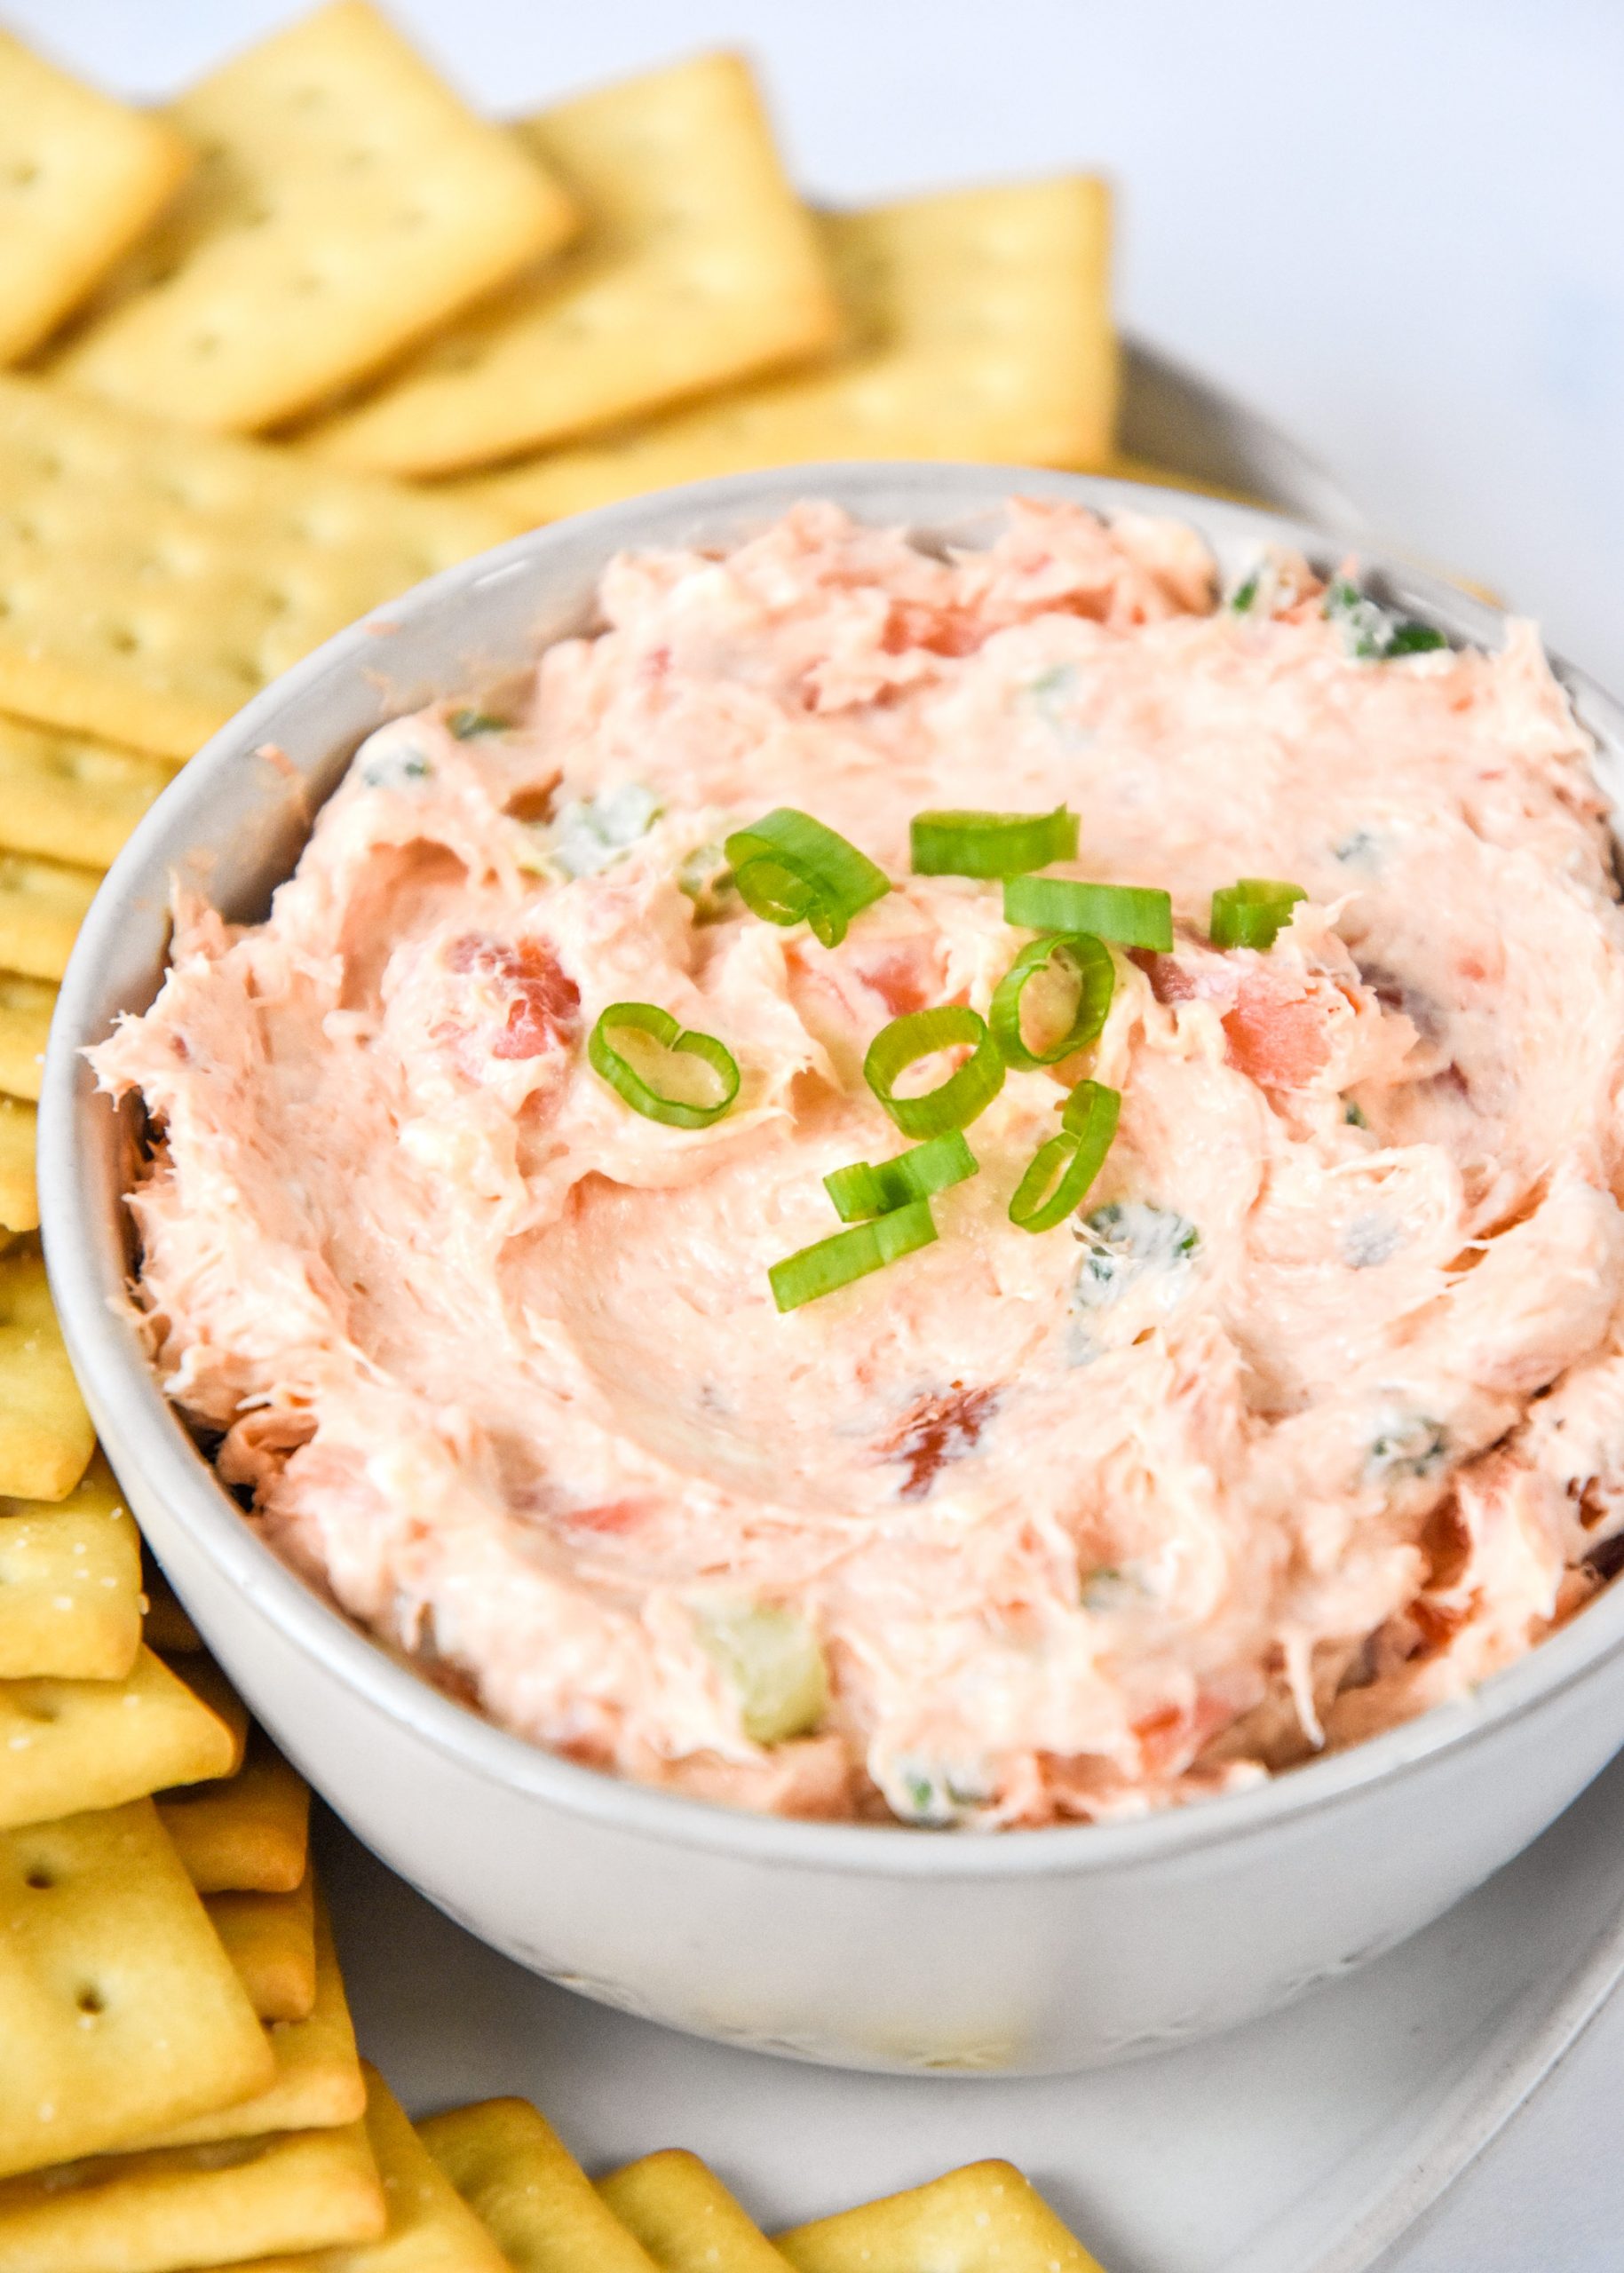 Hot Smoked Salmon Cream Cheese Dip - Project Meal Plan